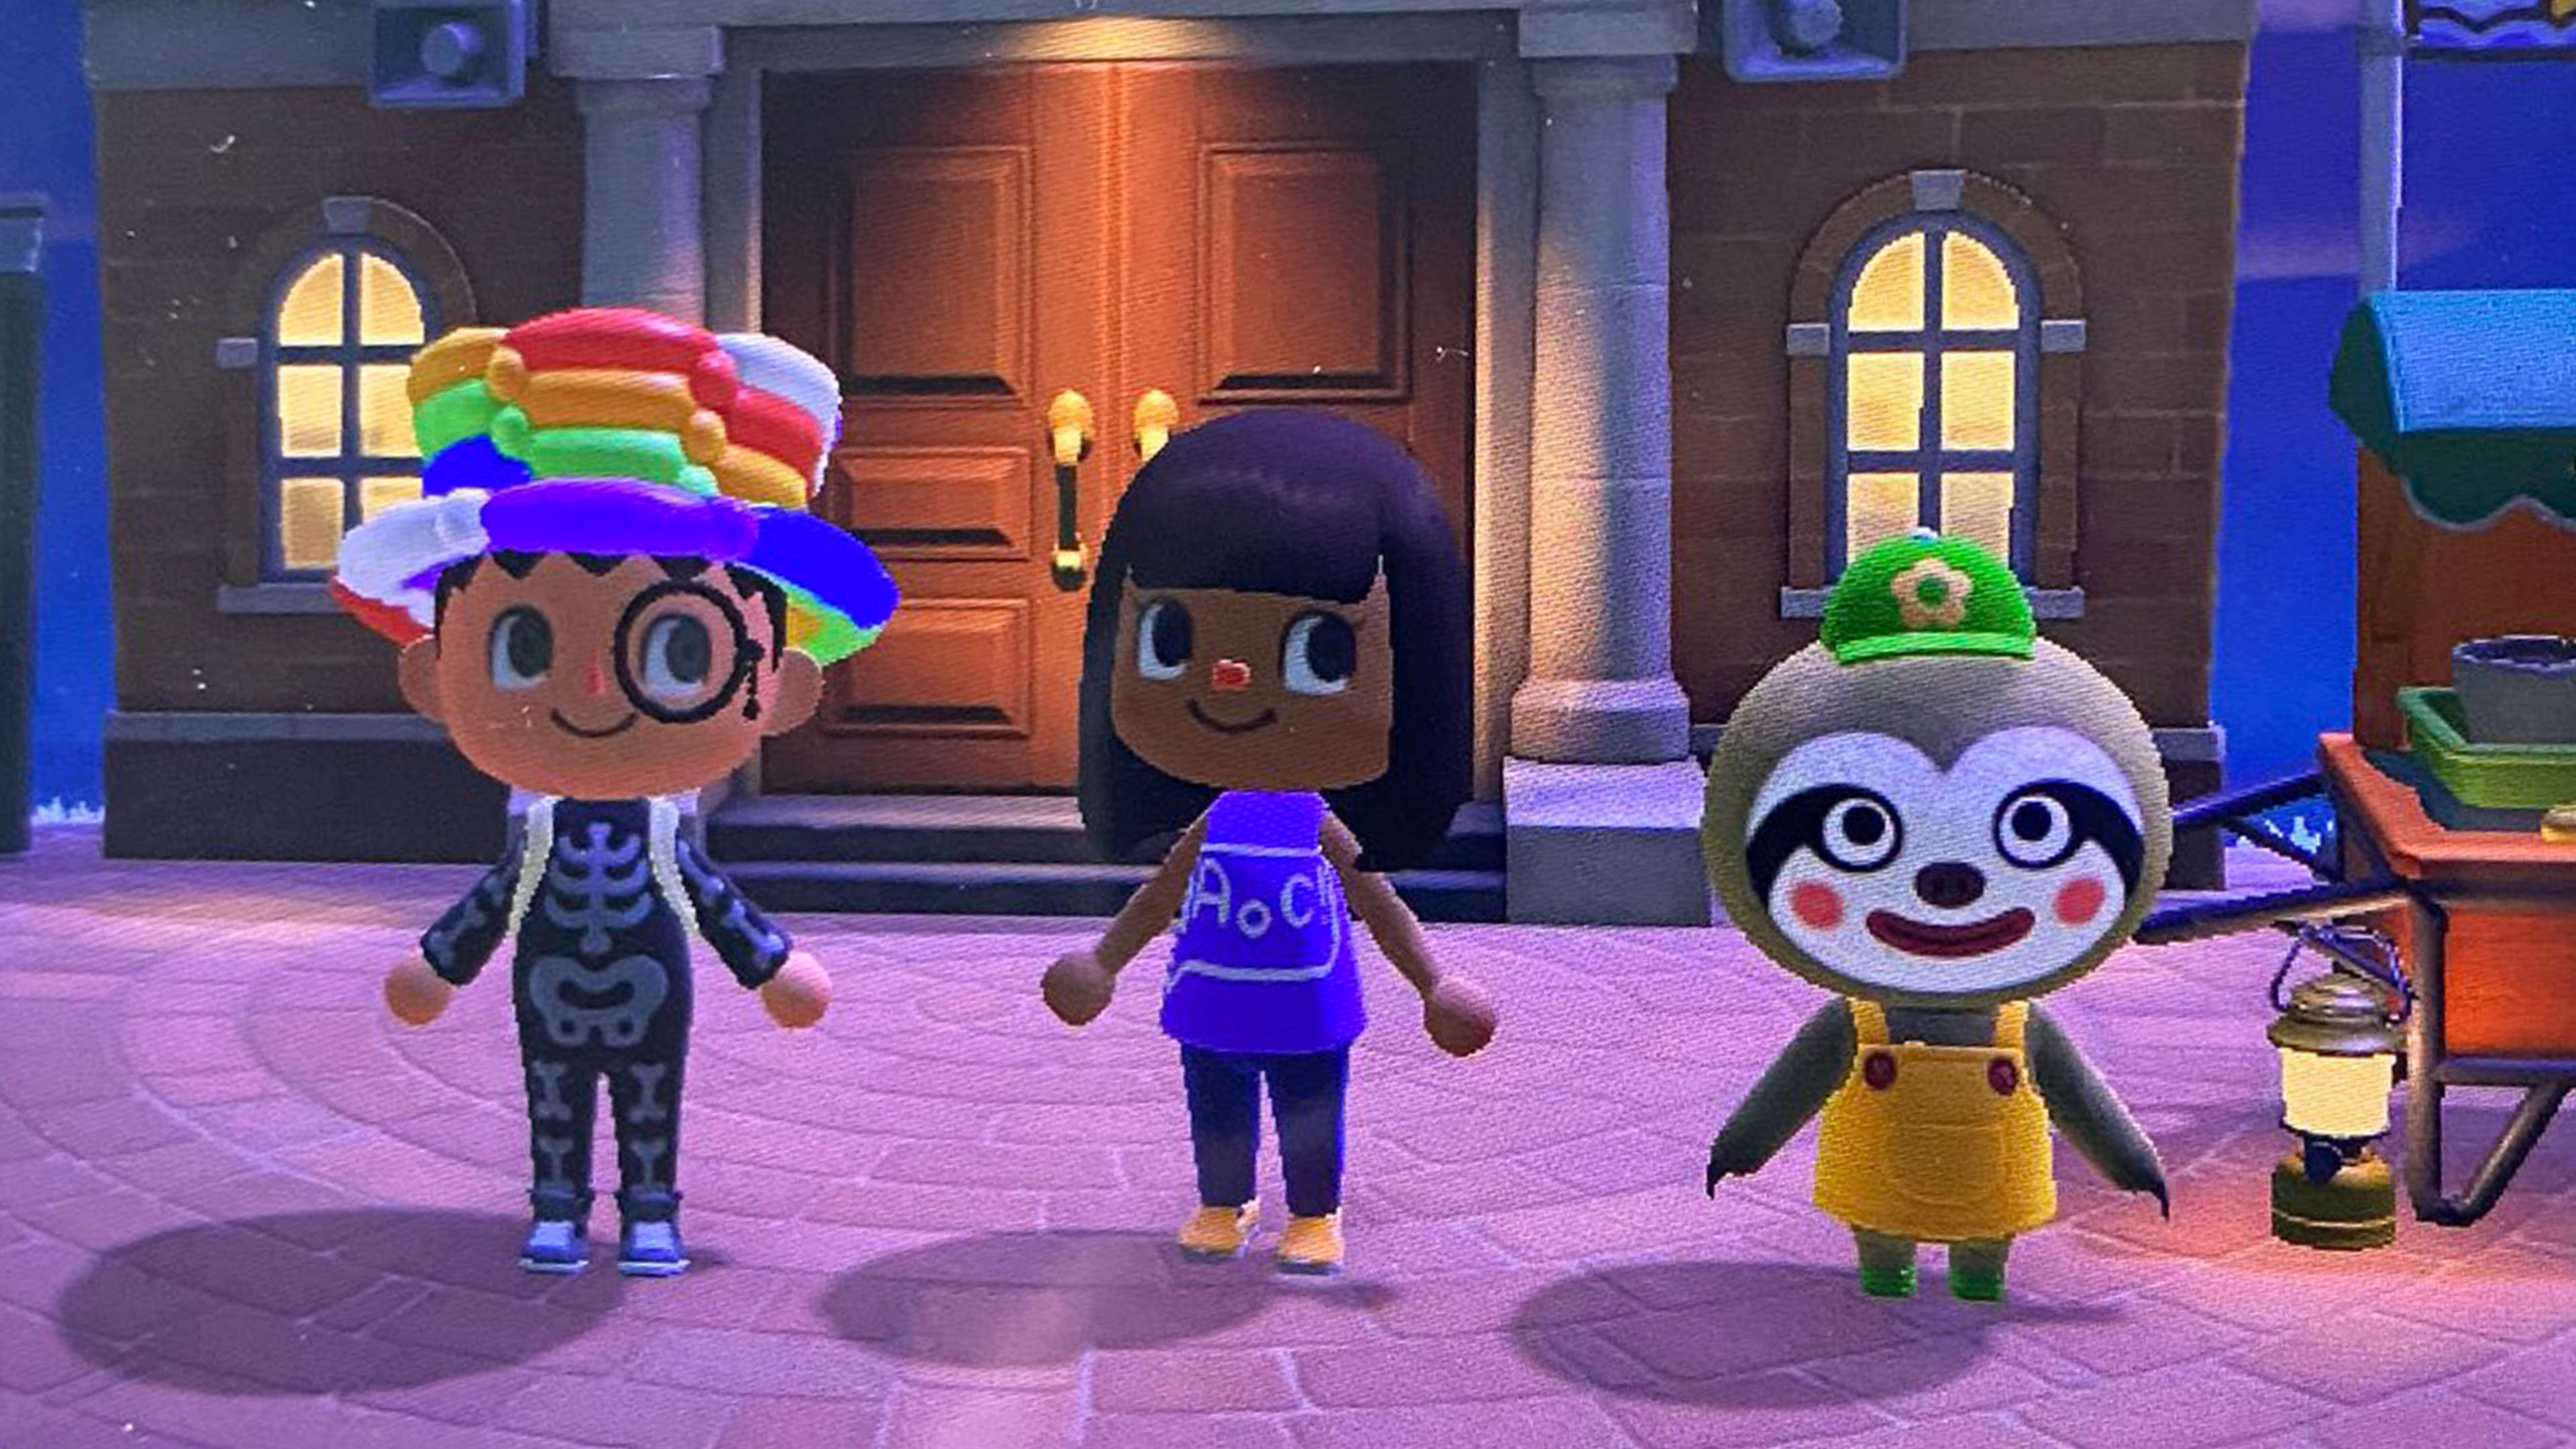 AOC is making house calls in ‘Animal Crossing.’ Other politicians should do the same